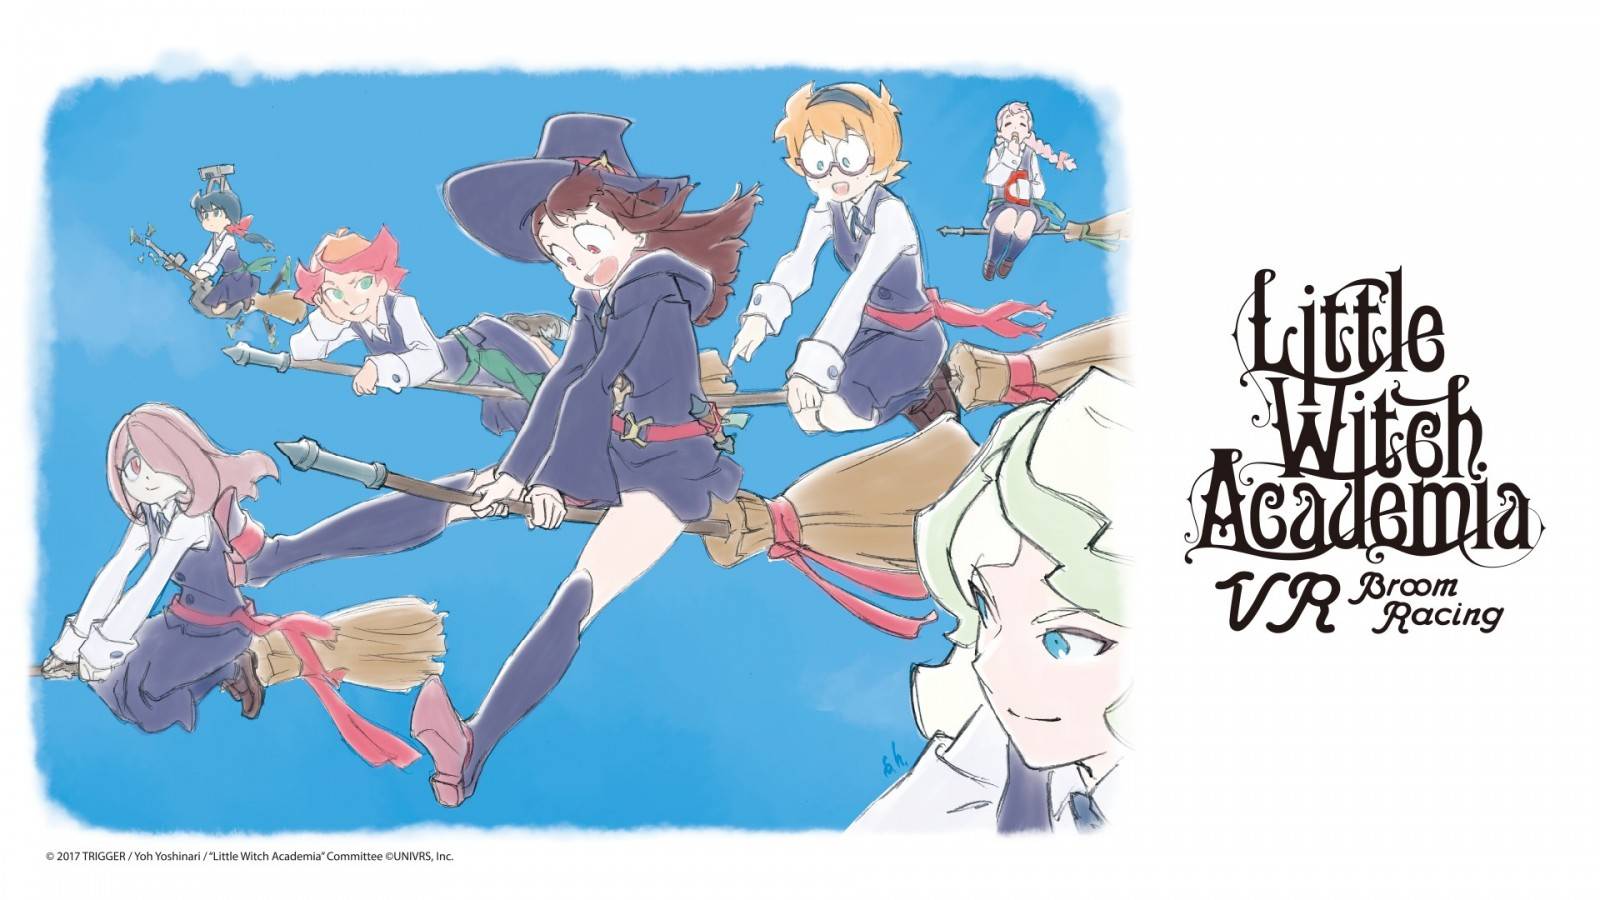 Little Witch Academia VR